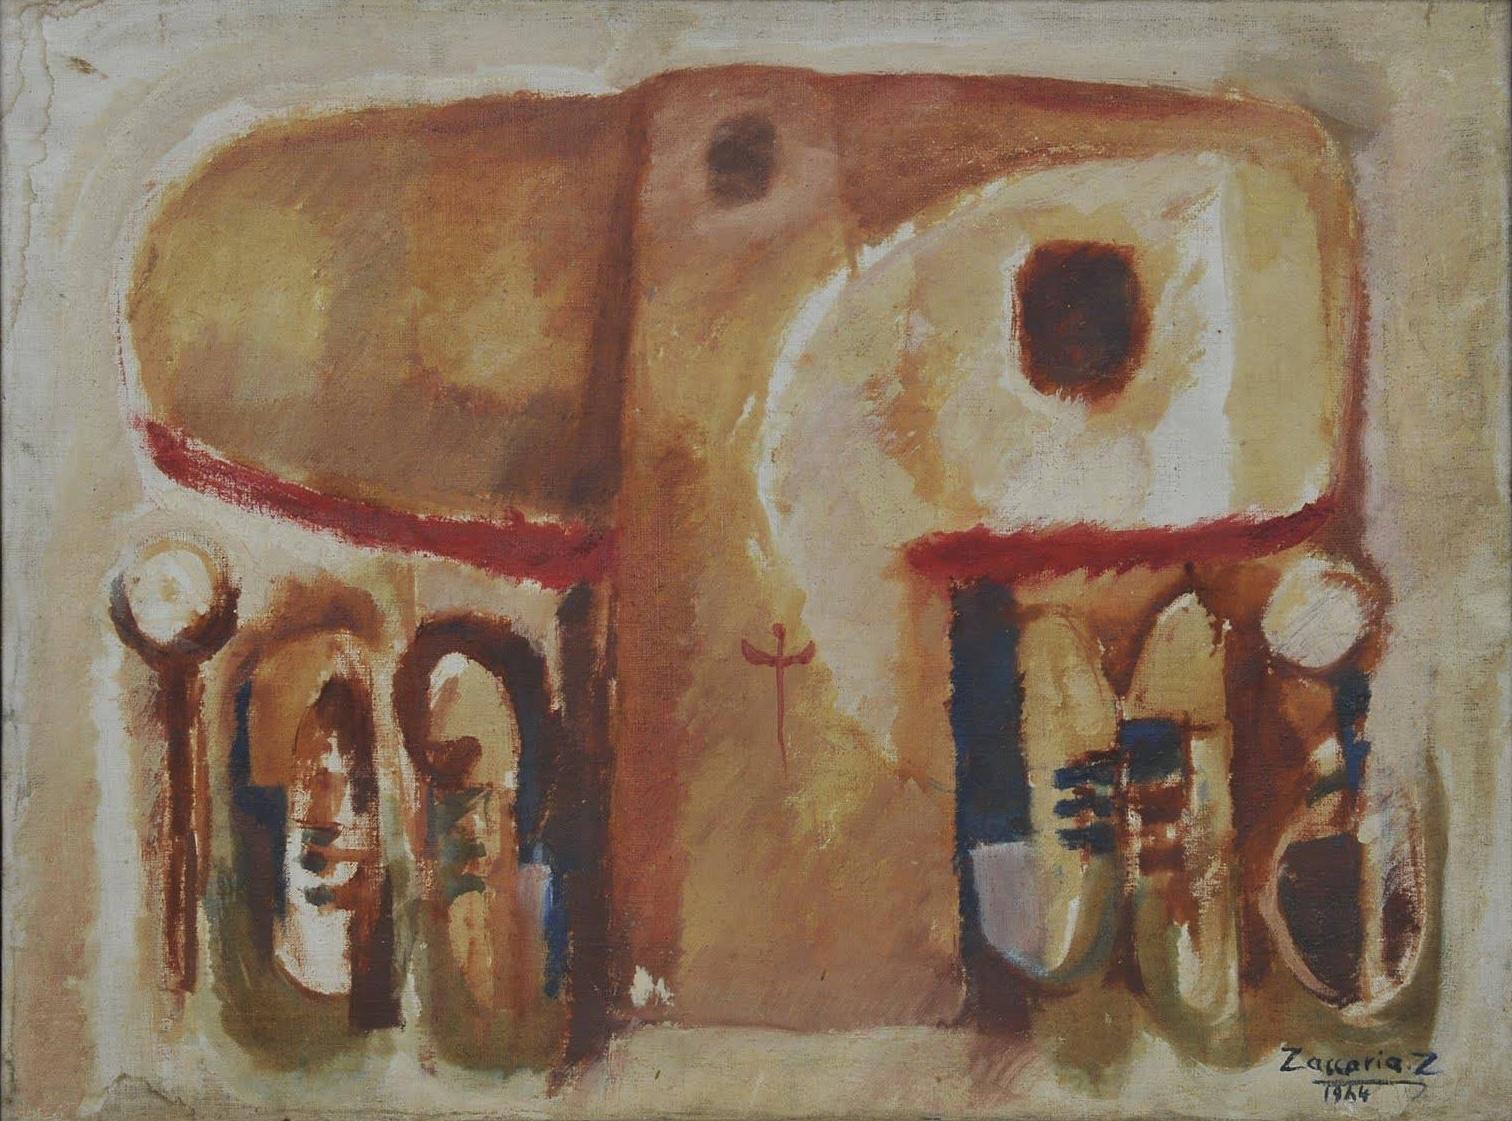 "Abode" Abstract Oil Painting 24" x 31.5" inch (1984) by Zaccaria Zeini

Medium: oil on canvas 
Signed and dated 

Comes in old original frame. 

Zaccaria El Zeini (1932 - 1993) was raised in the popular district of Sayyida Zienab in Old Cairo and